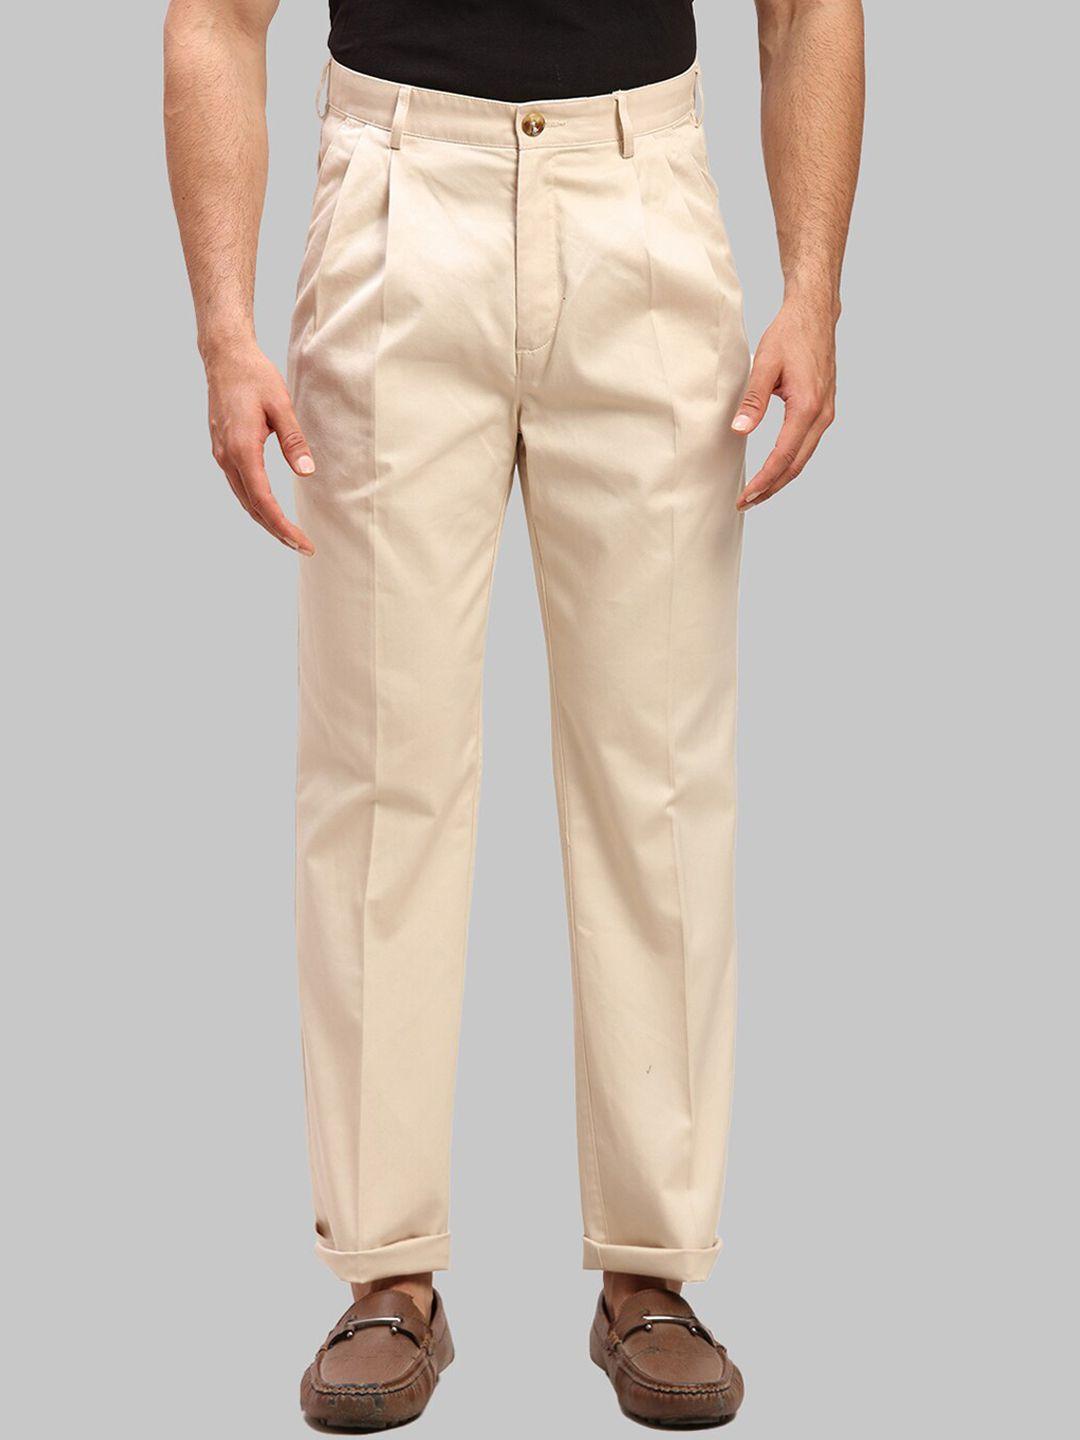 colorplus men pleated cotton chinos trousers